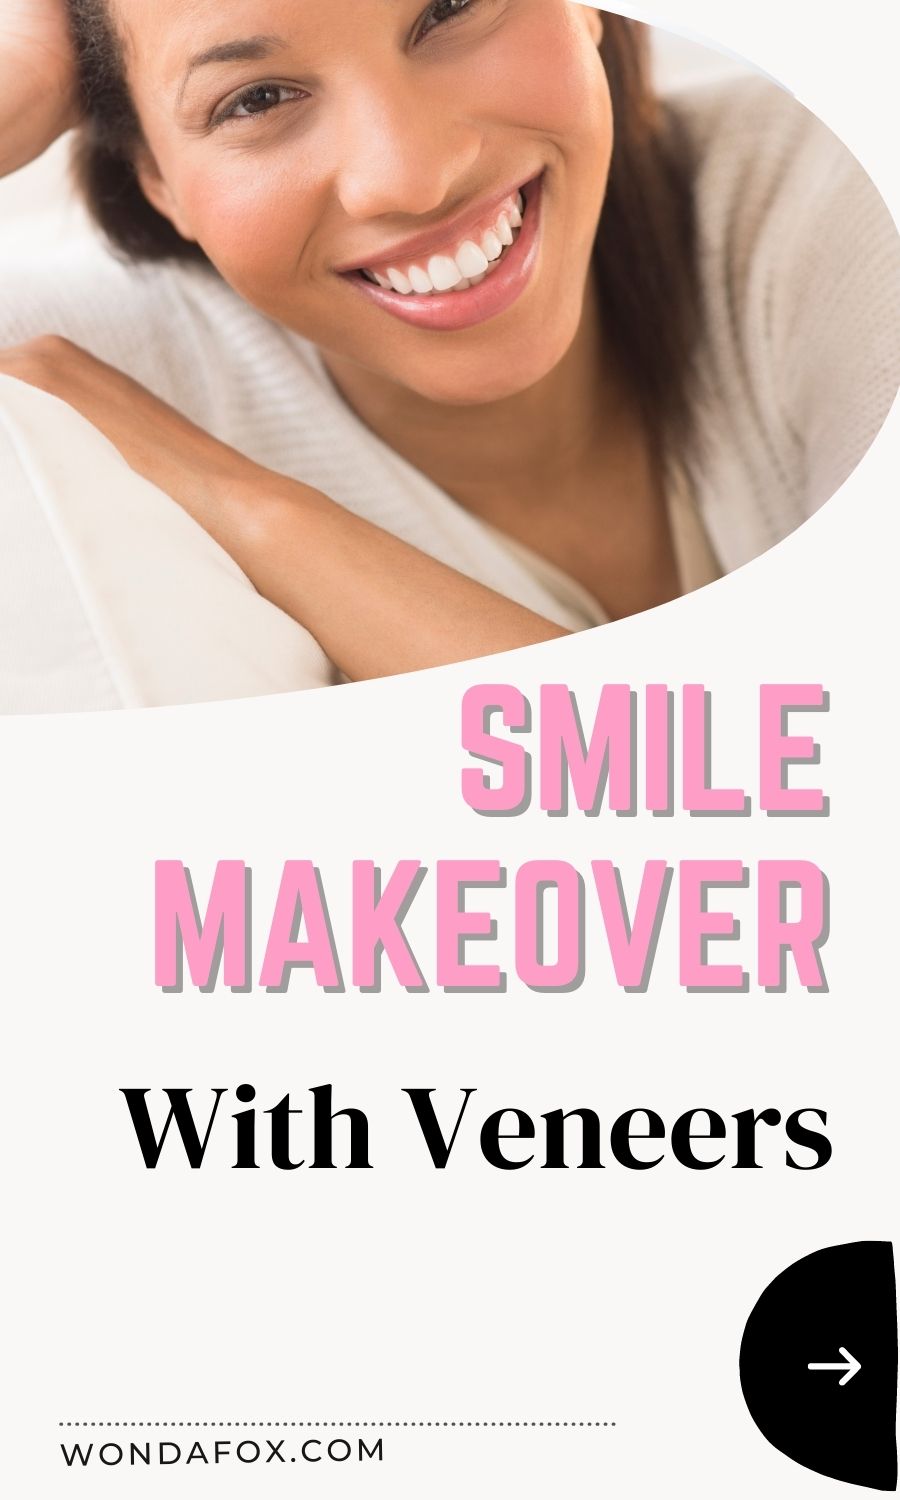 Smile Makeover With Veneers 